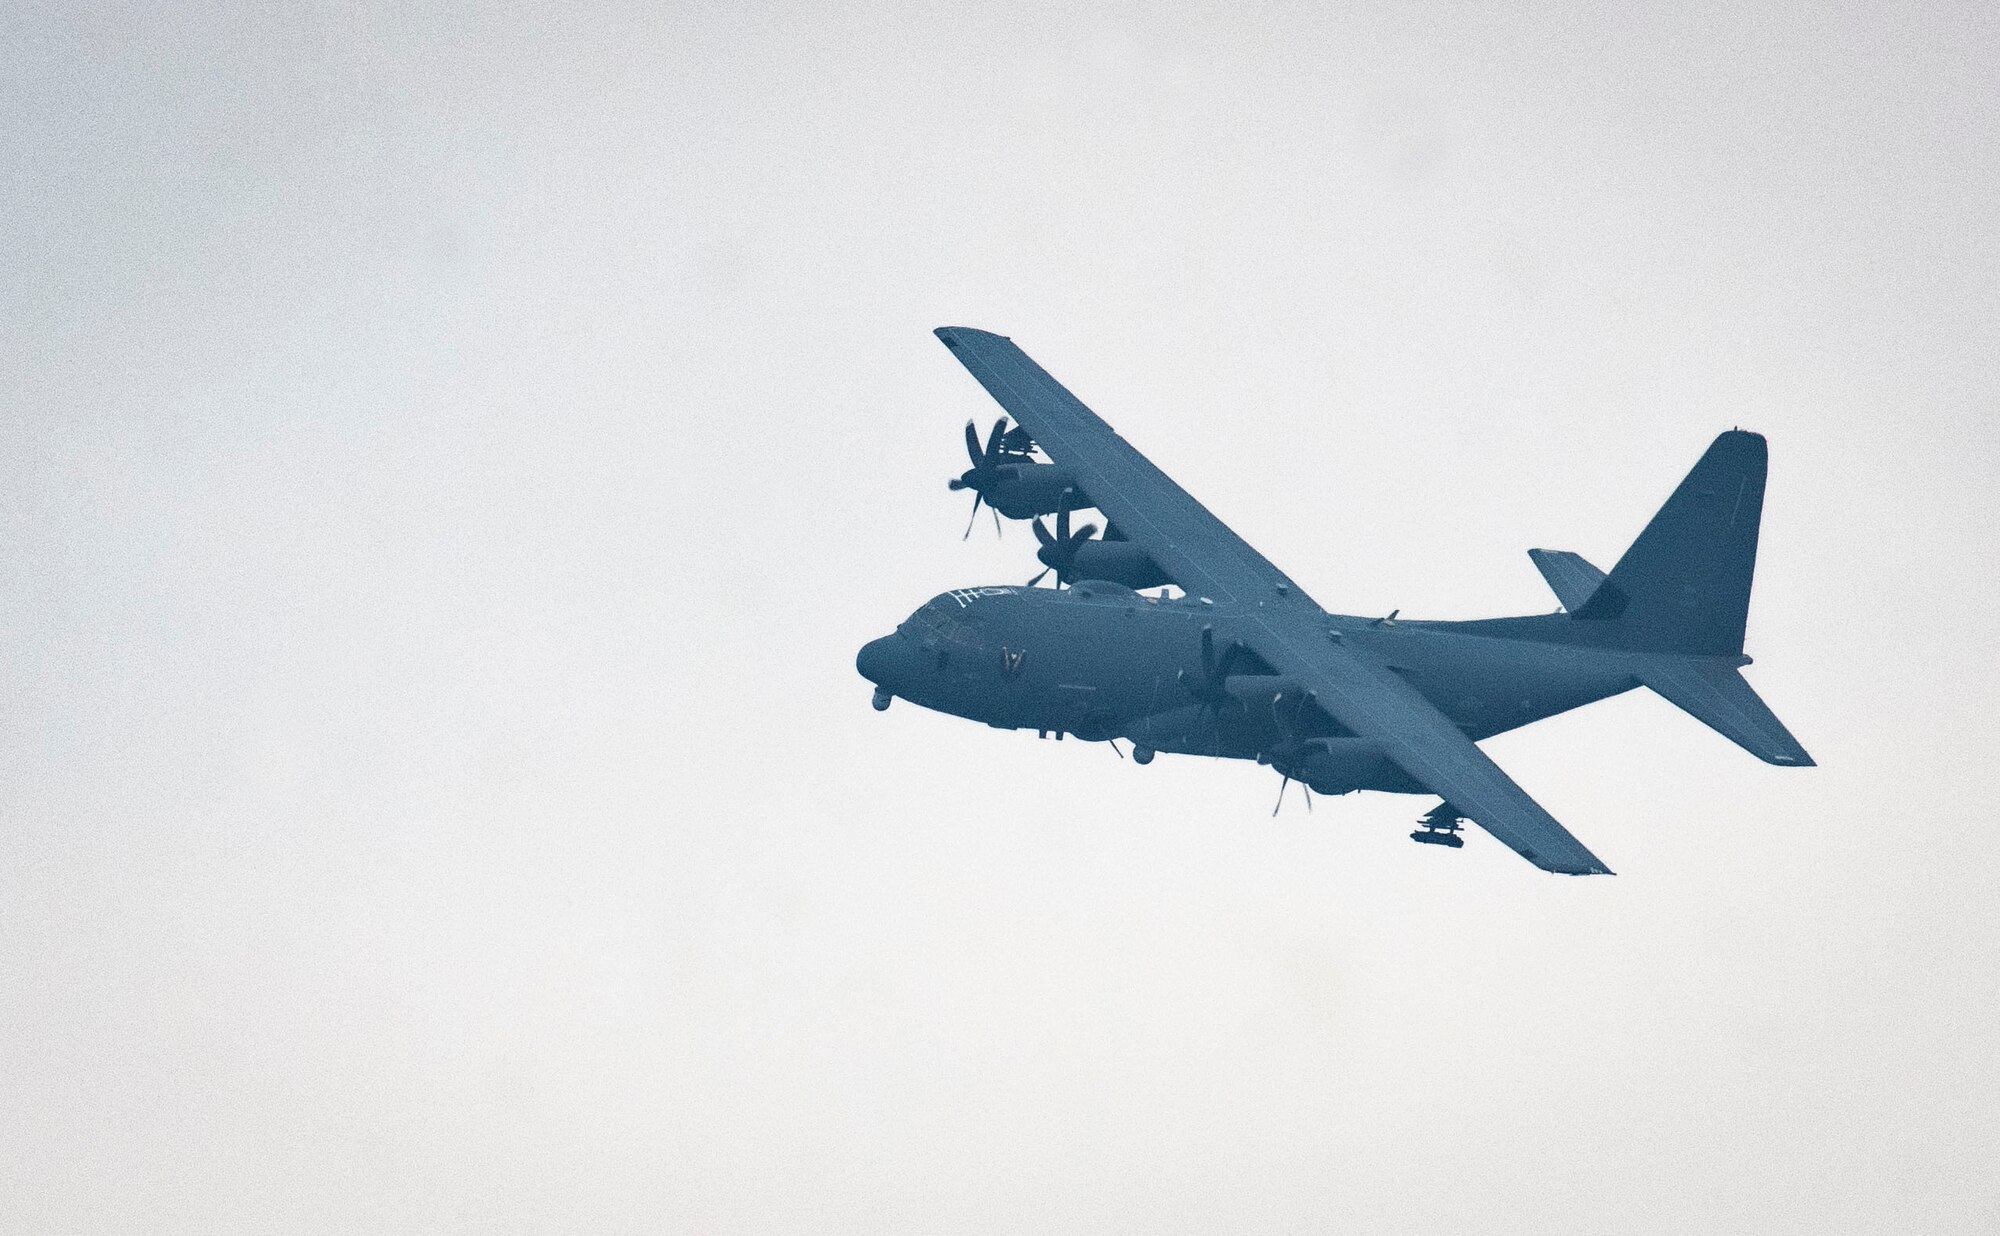 An AC-130J Ghostrider assigned to Air Force Special Operations Command demonstrates AFSOC’s airpower capabilities at Wittman Regional Airport, Wis., July 29, 2021.